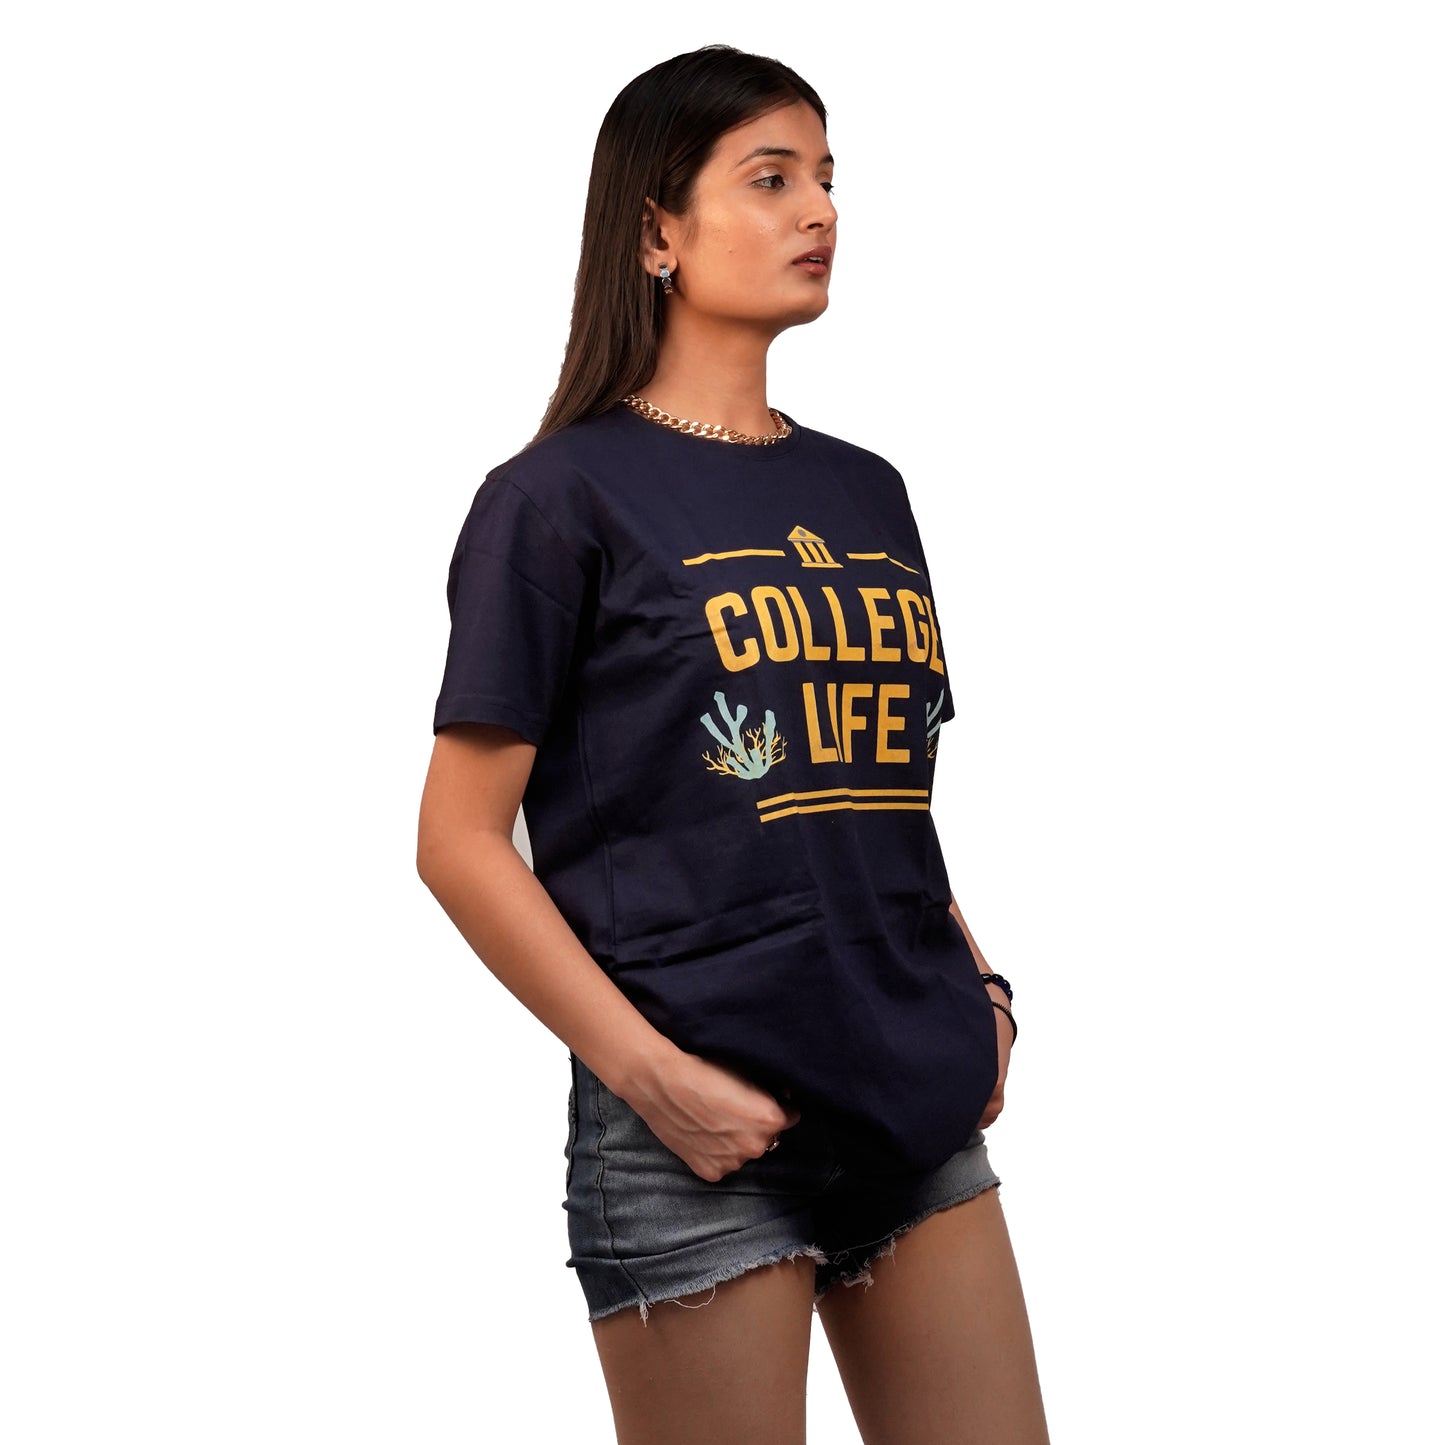 College Life T-Shirt In Navy Blue Color For Women